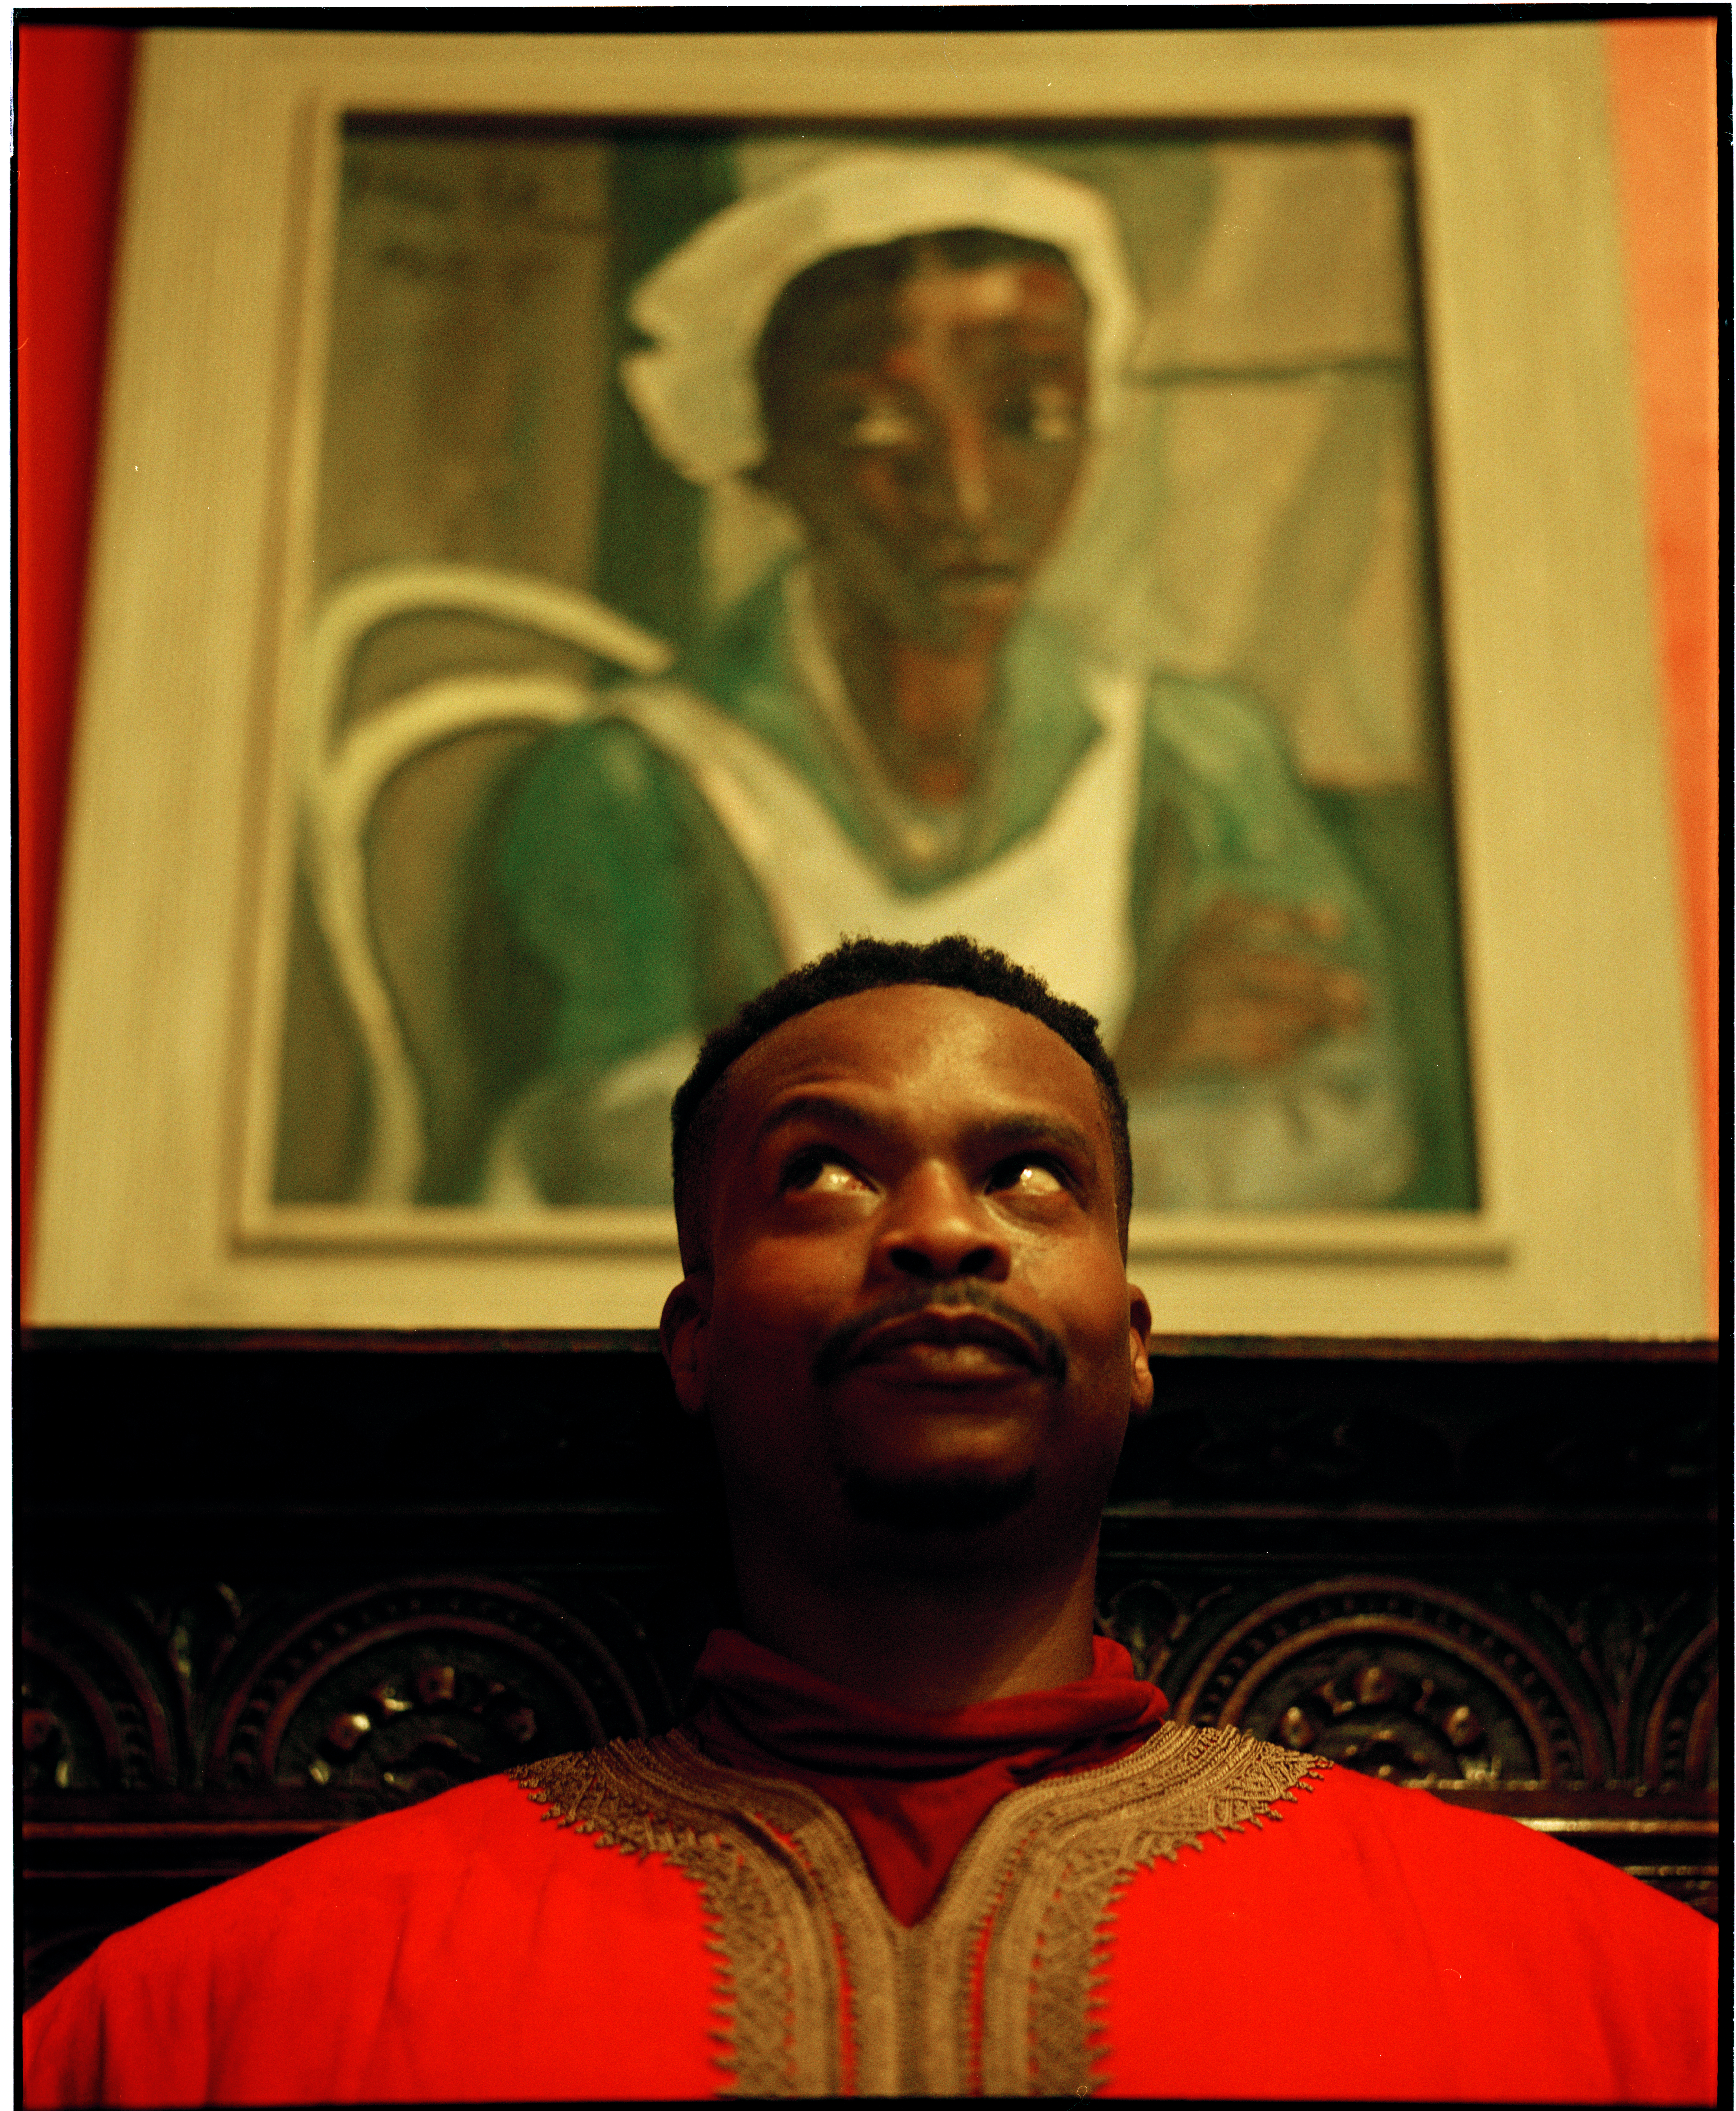 Athi-Patra Ruga stands in front of "Maid in Uniform" by Irma Stern.